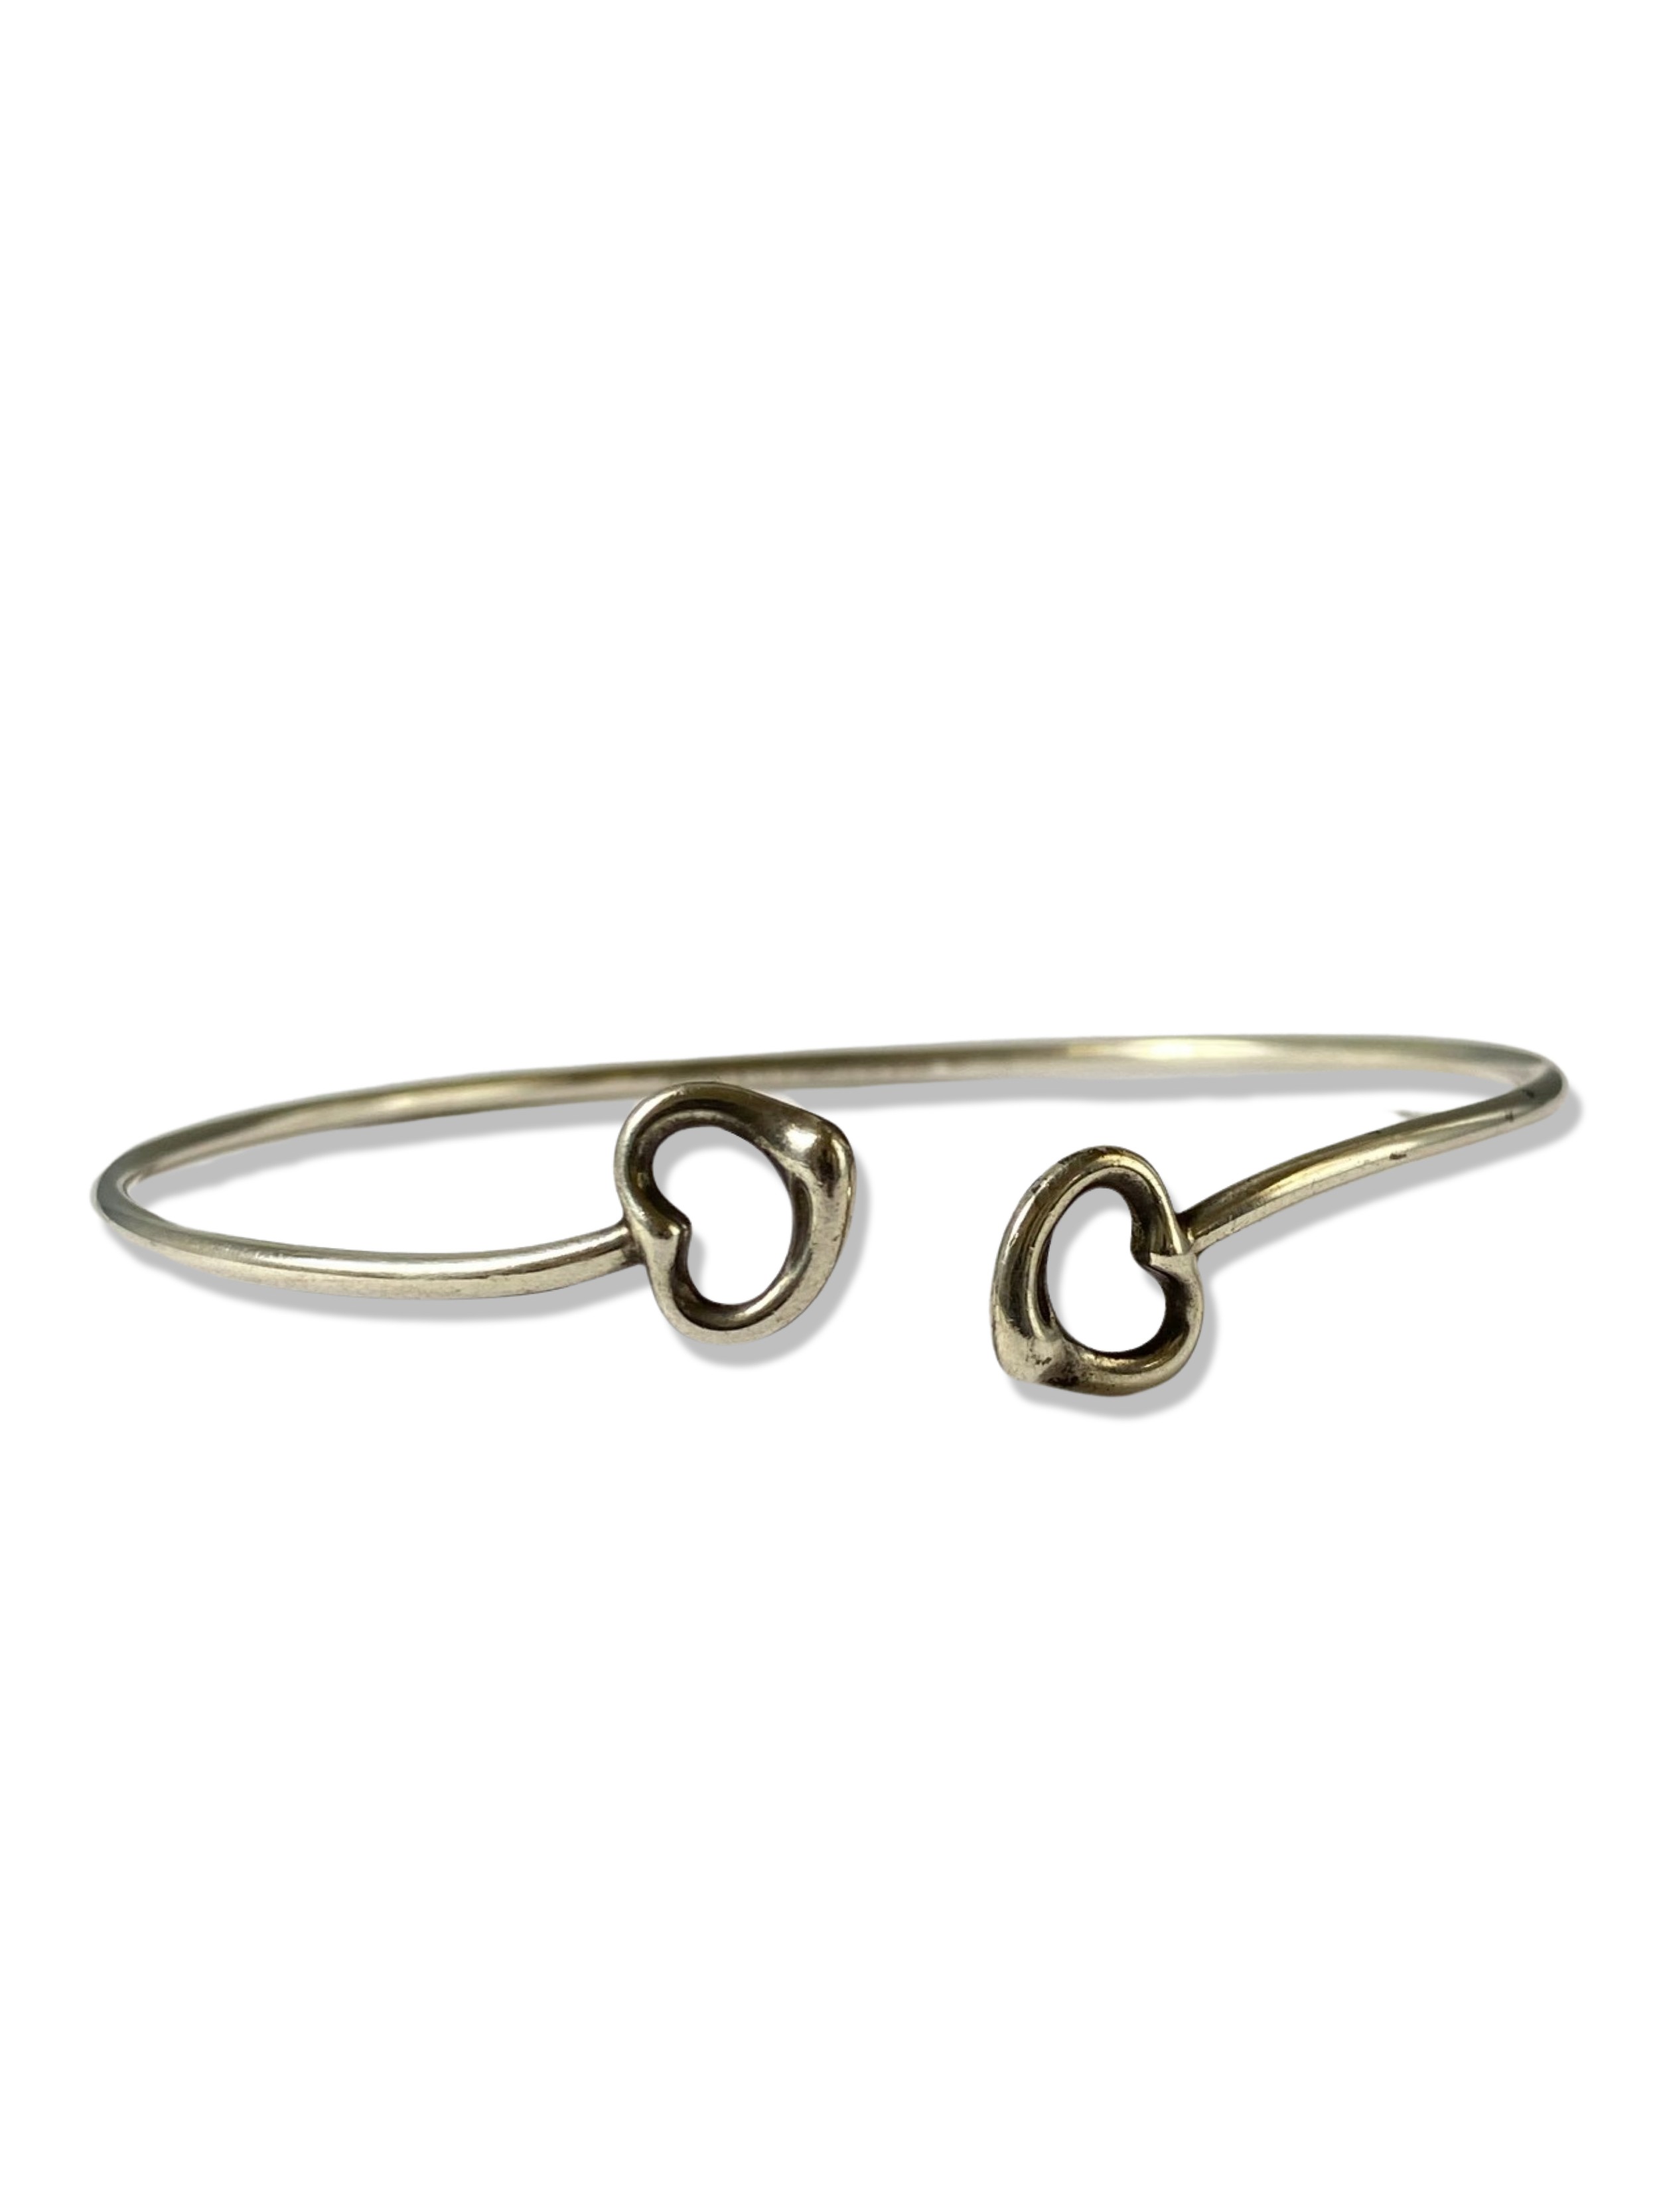 Tiffany & Co. silver love bangle weighing 7.26 grams